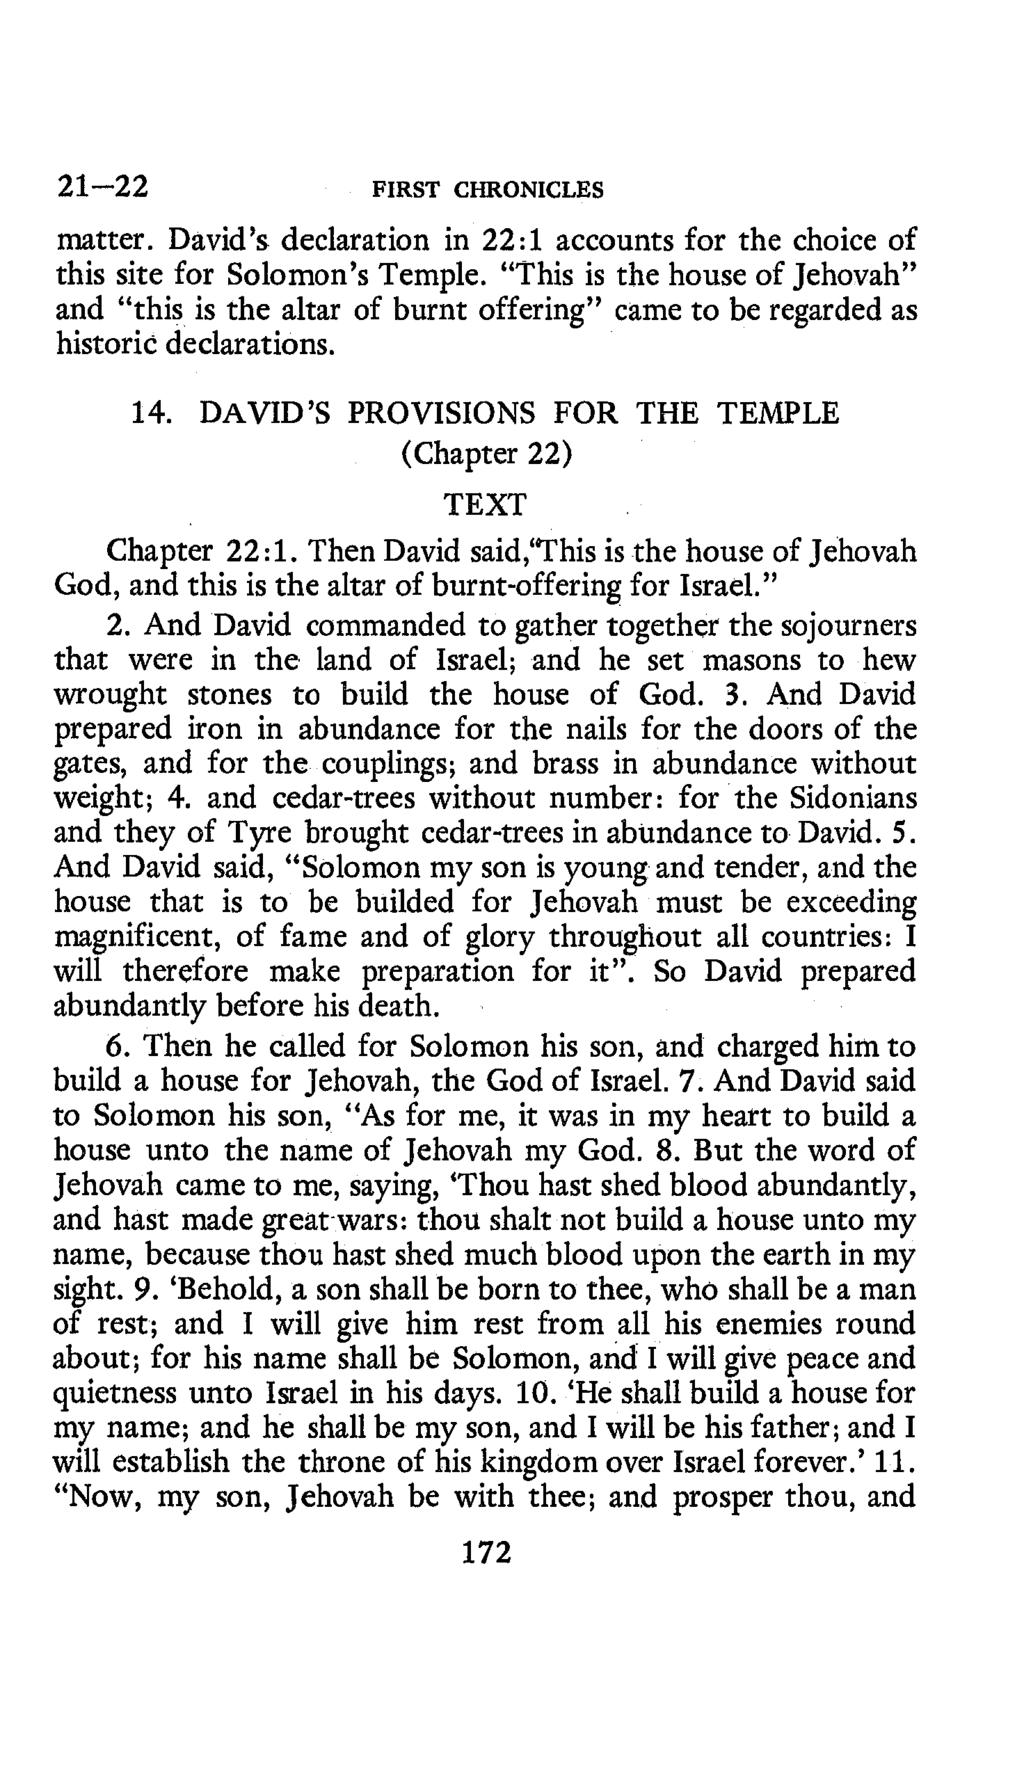 21-22 FIRST CHRONICLES matter. David s declaration in 22:l accounts for the choice of this site for Solomon s Temple.